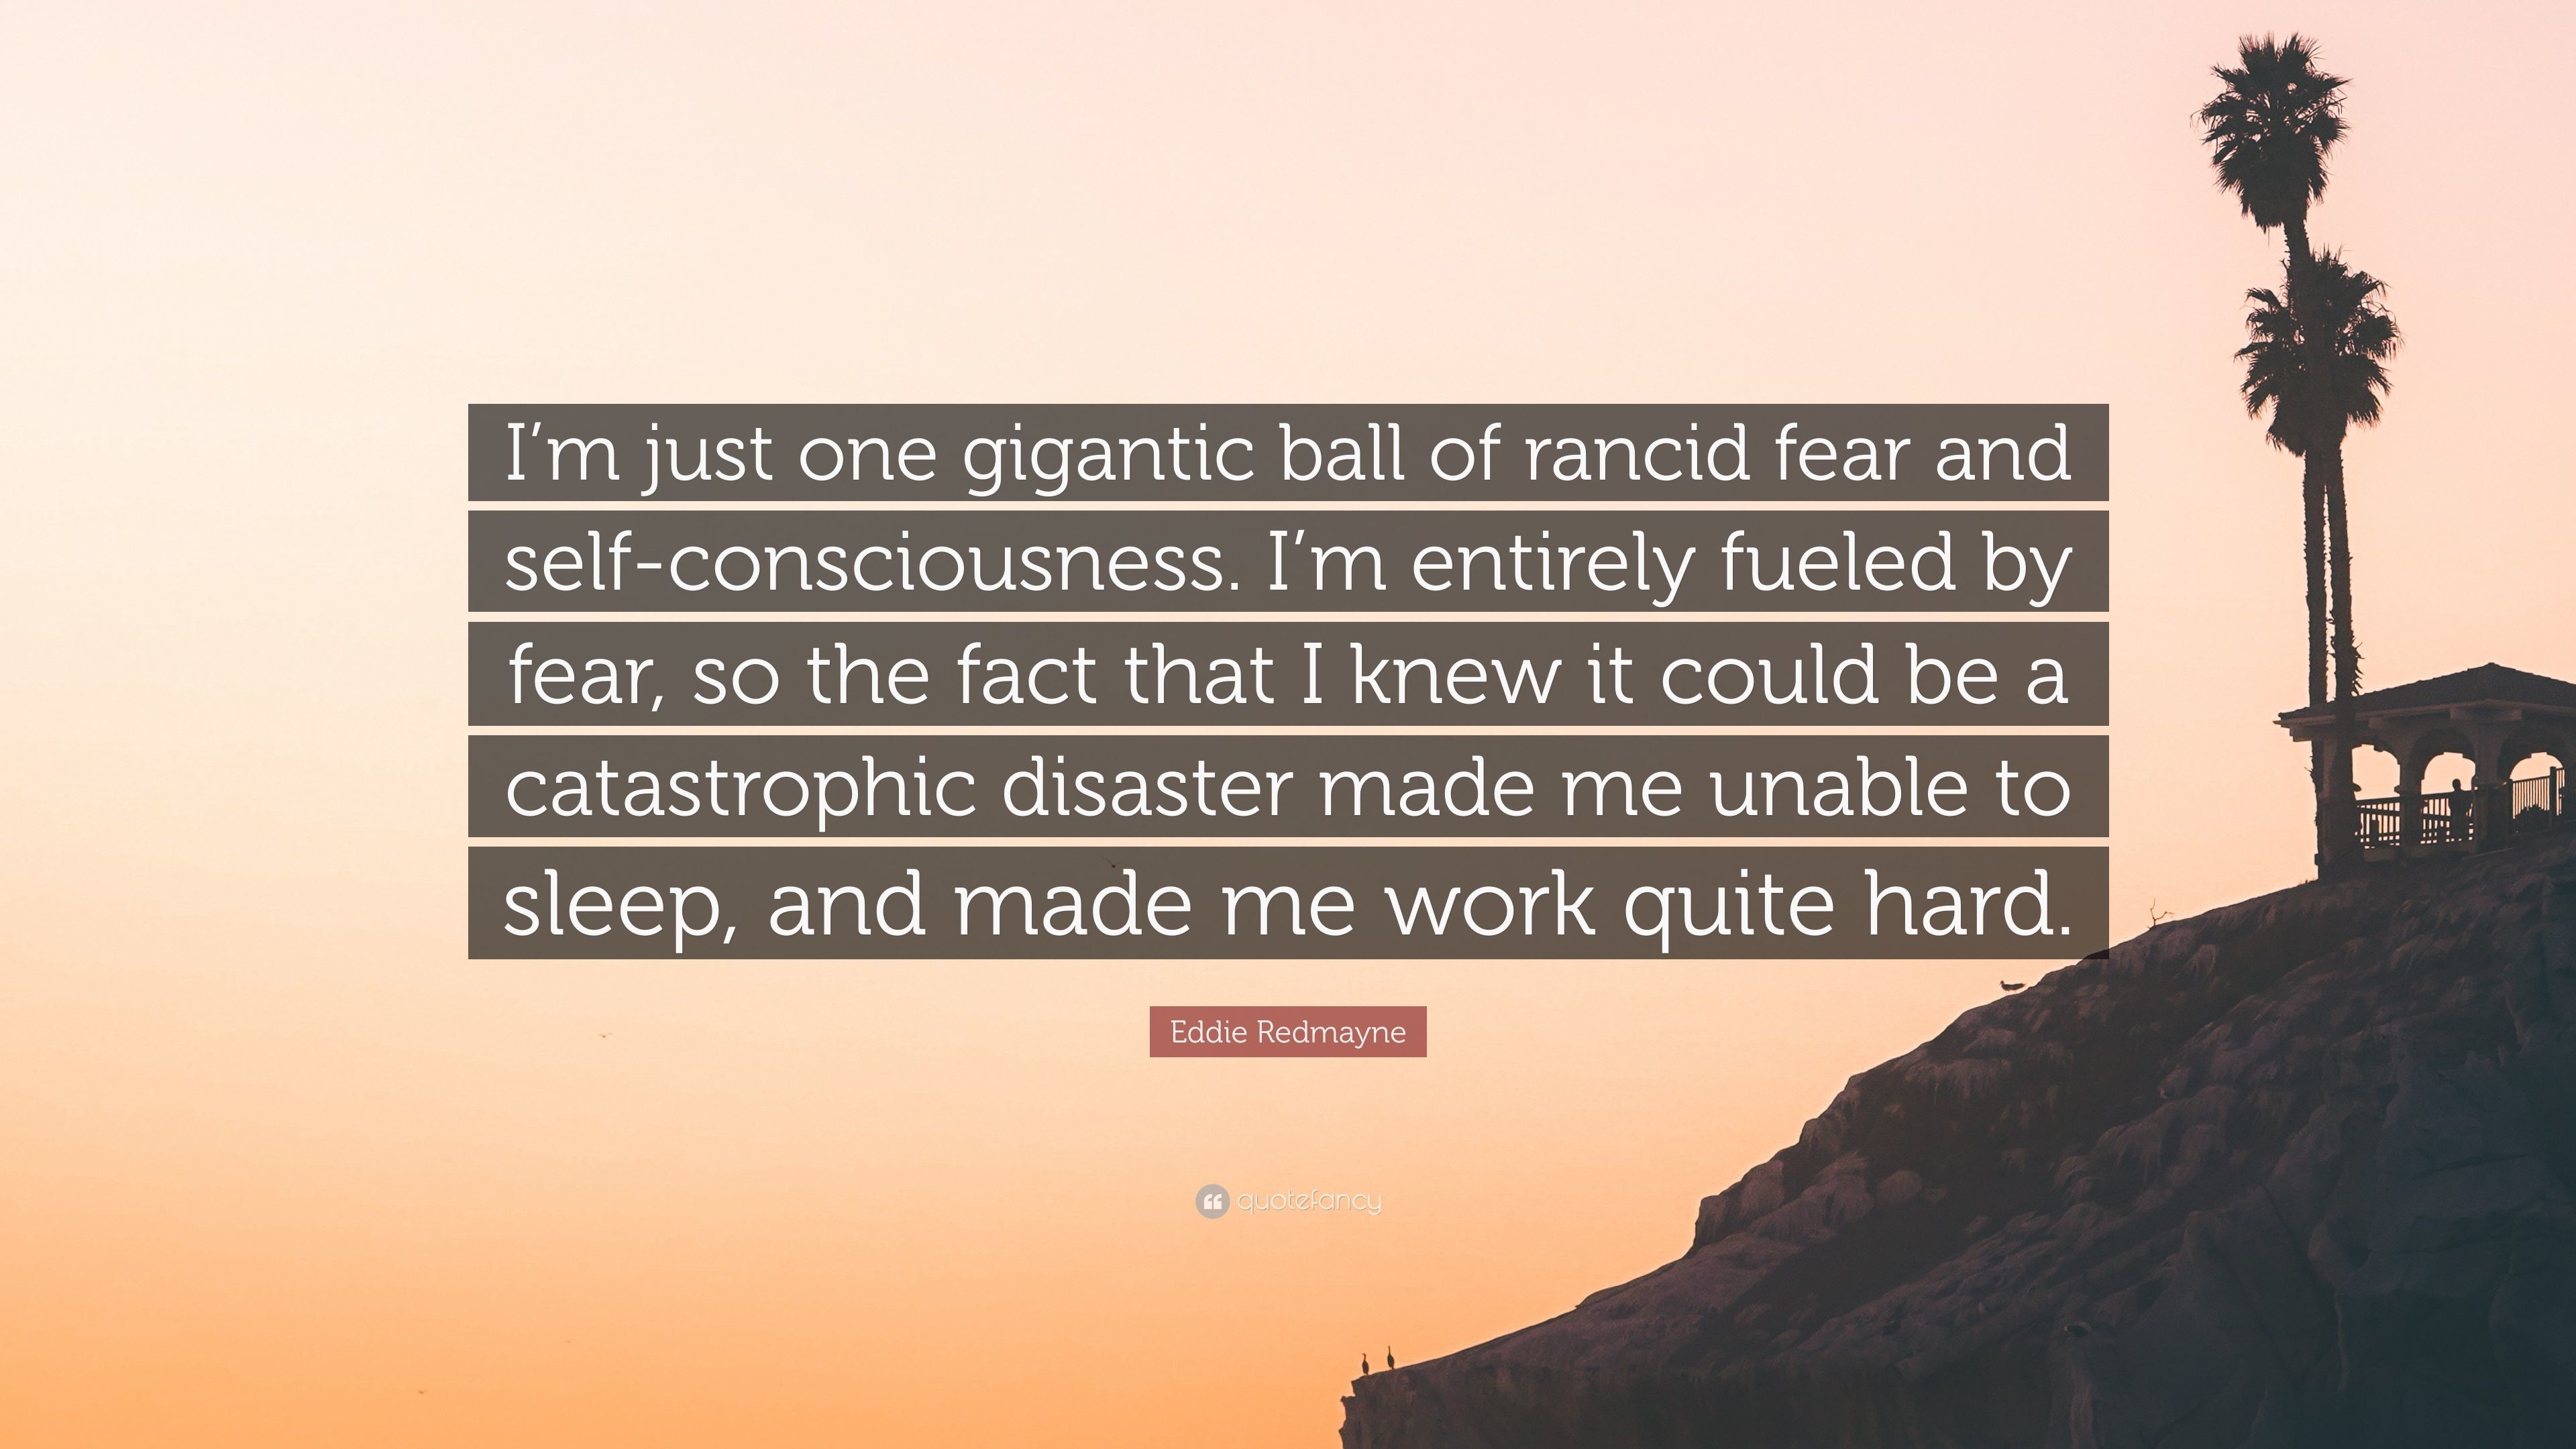 3840x2160 Eddie Redmayne Quote: “I'm just one gigantic ball of rancid fear and